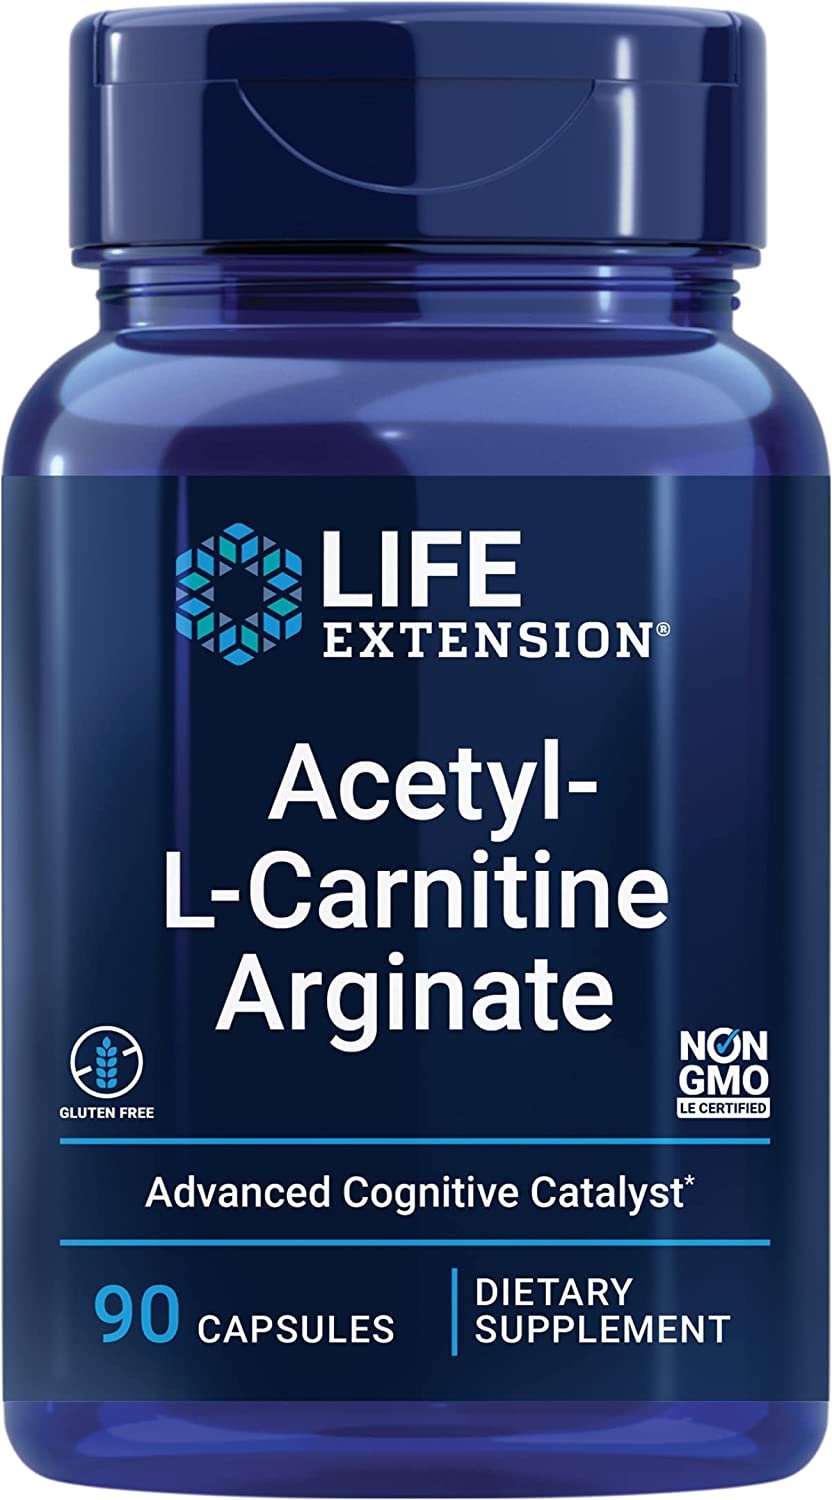 Life Extension Acetyl-L-Carnitine Arginate - Advanced Amino Acid Carnitine Supplement Pills for Memory, Cognition, Cell Energy & Brain Health Support – Gluten-Free, Non-GMO – 90 Capsules